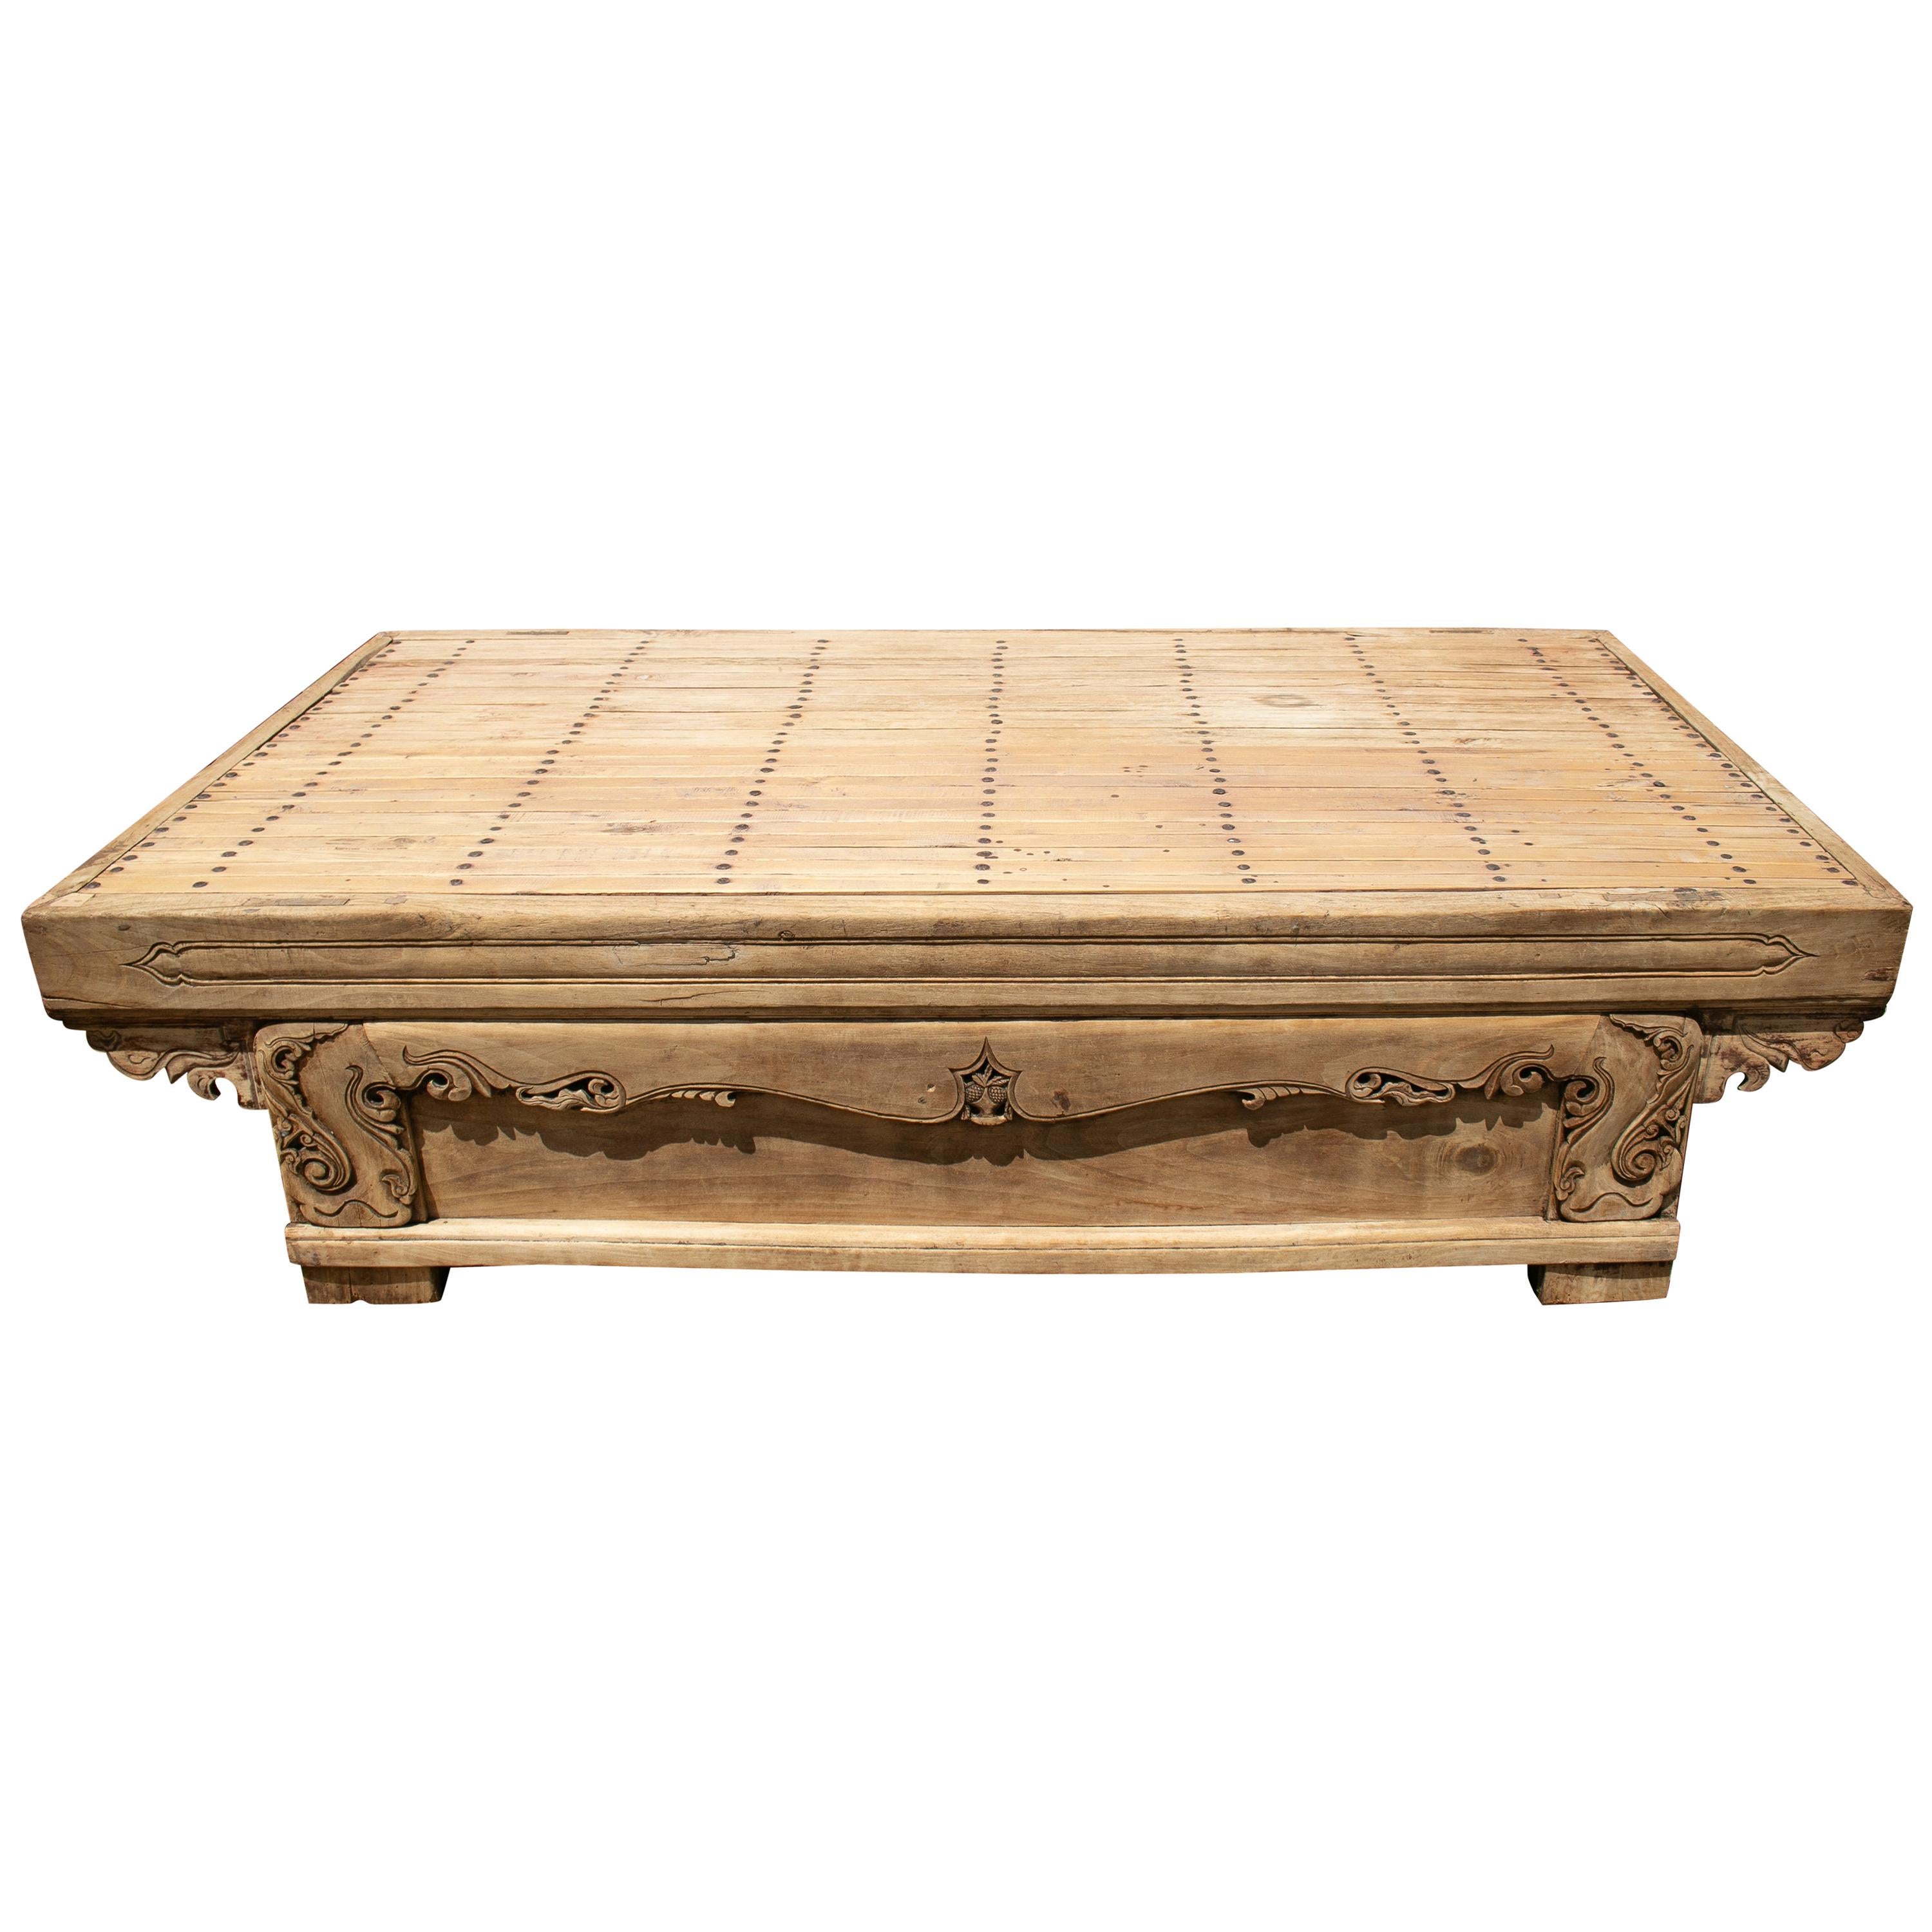 19th Century Hand Carved Wooden Oriental Coffee Table